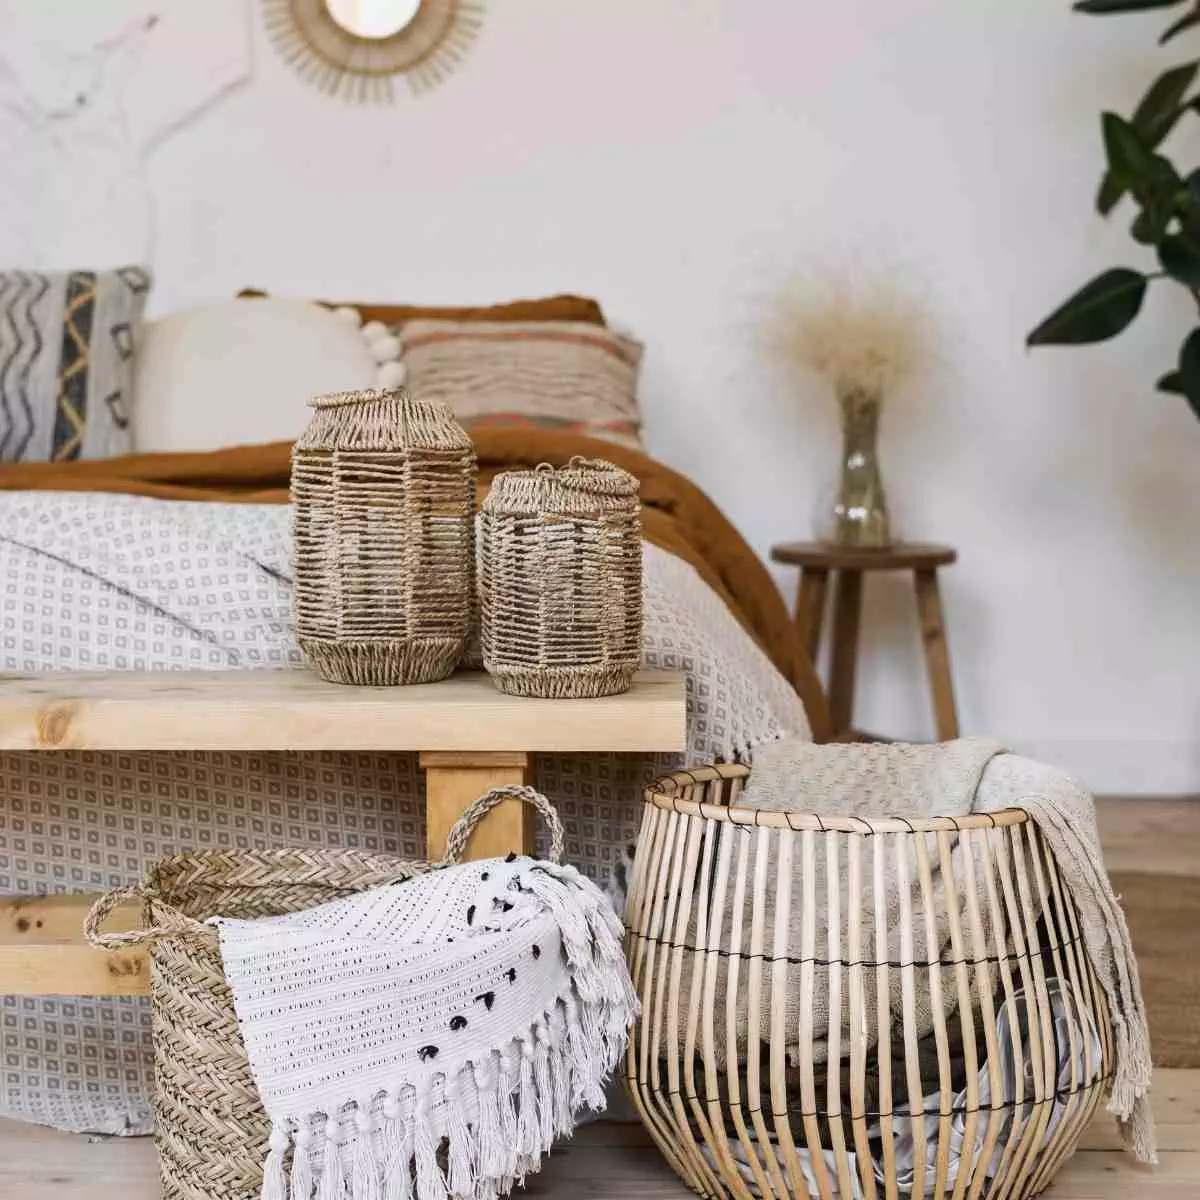 All the Wicker Furniture you need | The Wicker Home®